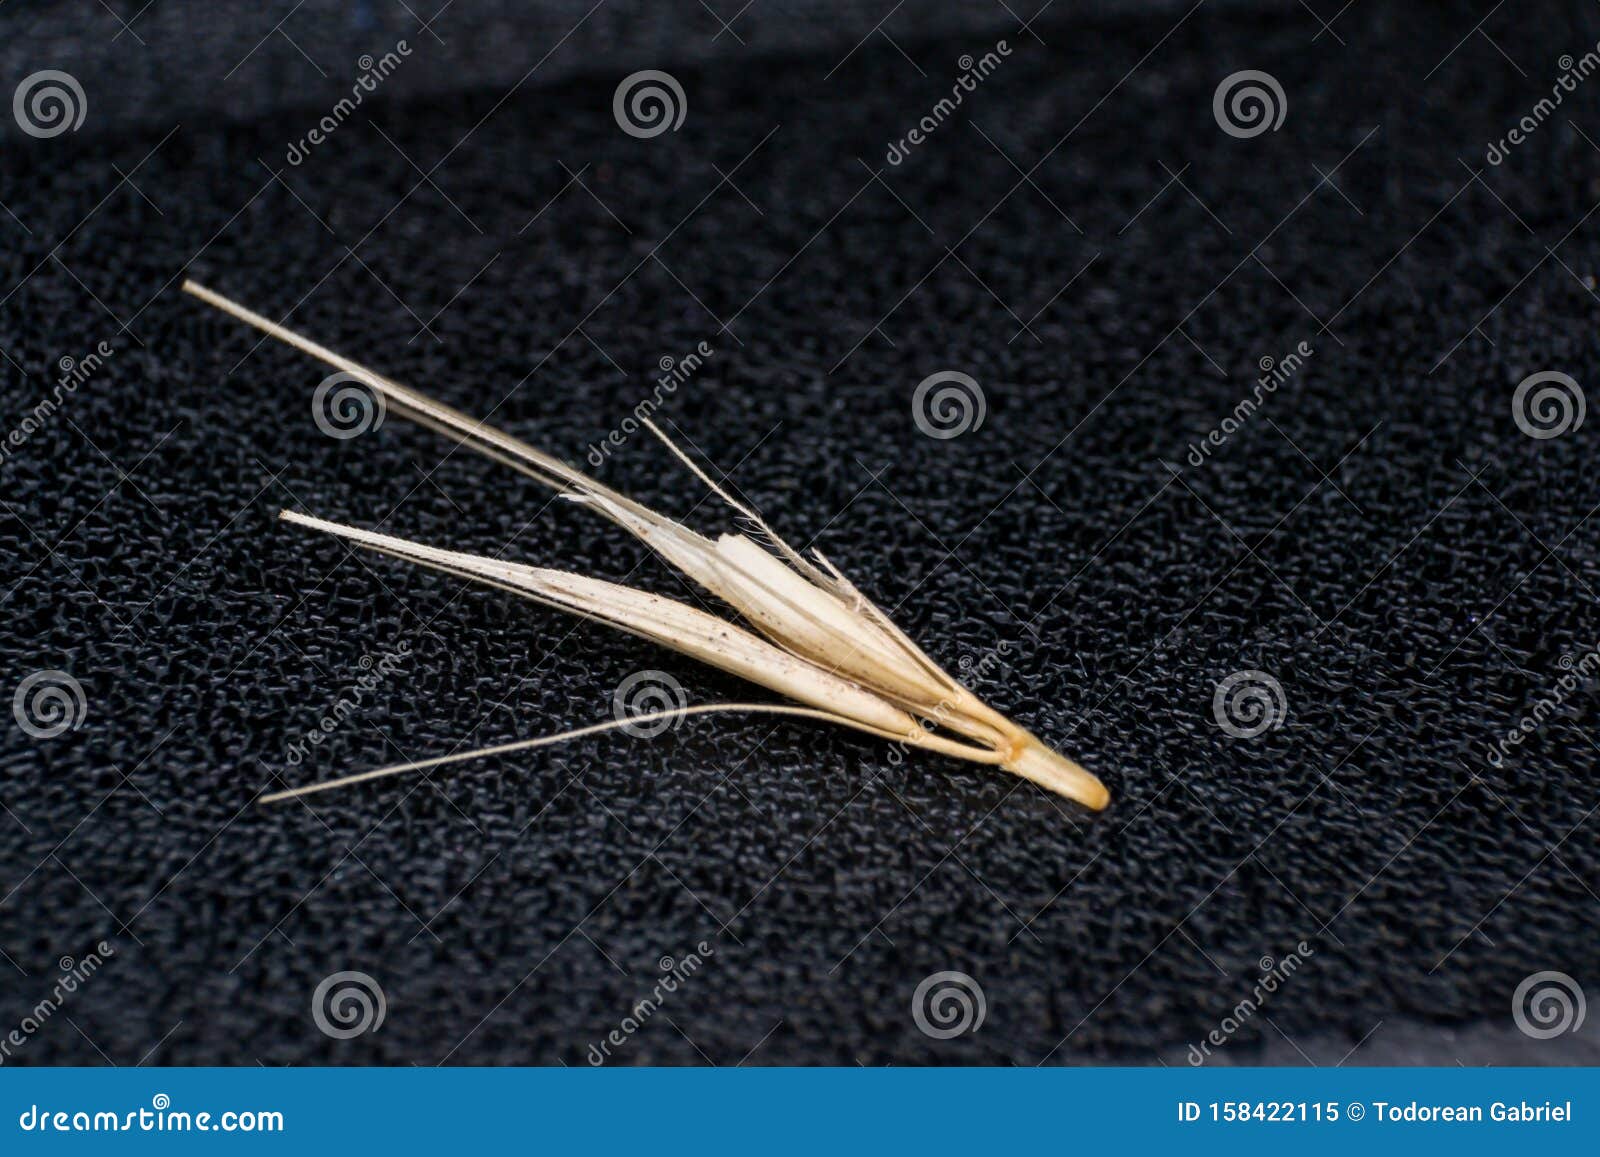 macro photo of a tiny arrowheads of the foxtail grass. when a dog enters my consulting room shaking its head or licking its paw